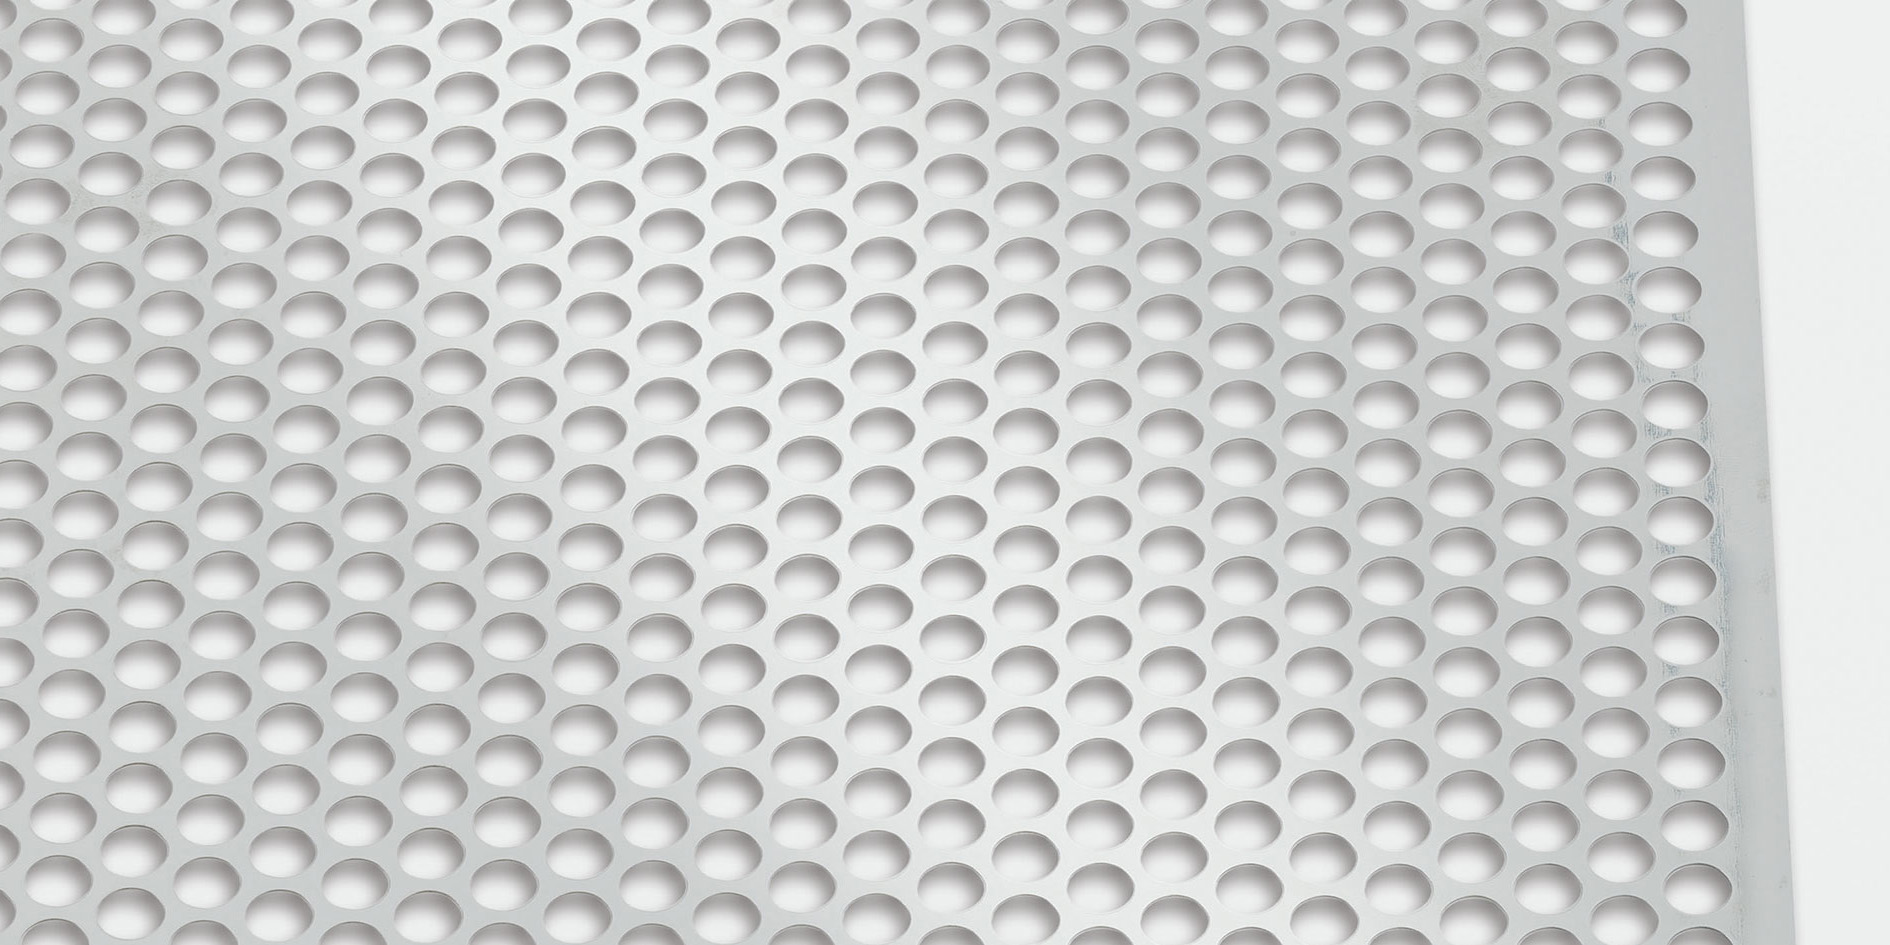 Sheet with round perforations